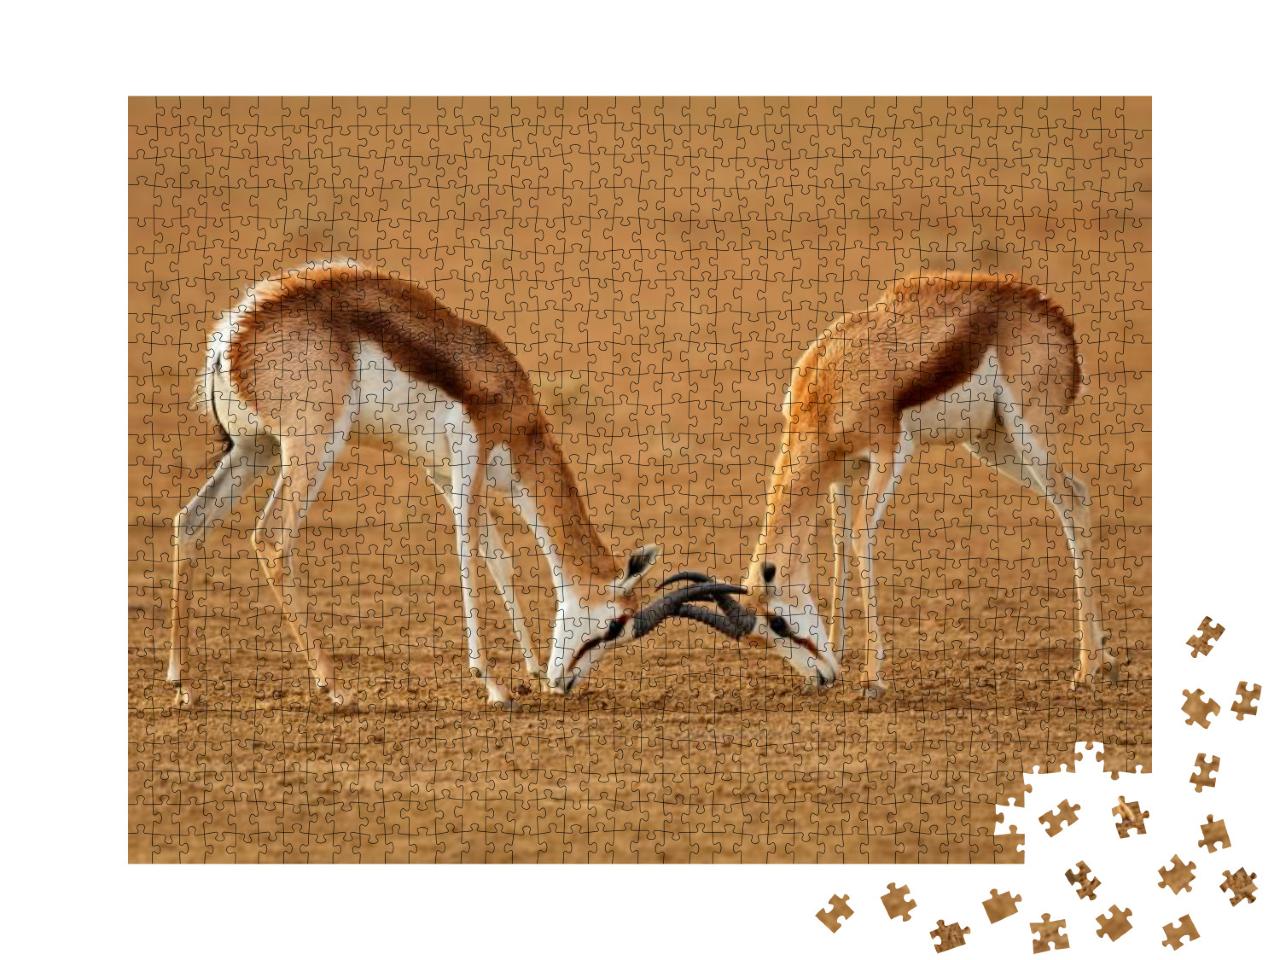 Two Male Springbok Antelopes Antidorcas Marsupialis Fight... Jigsaw Puzzle with 1000 pieces